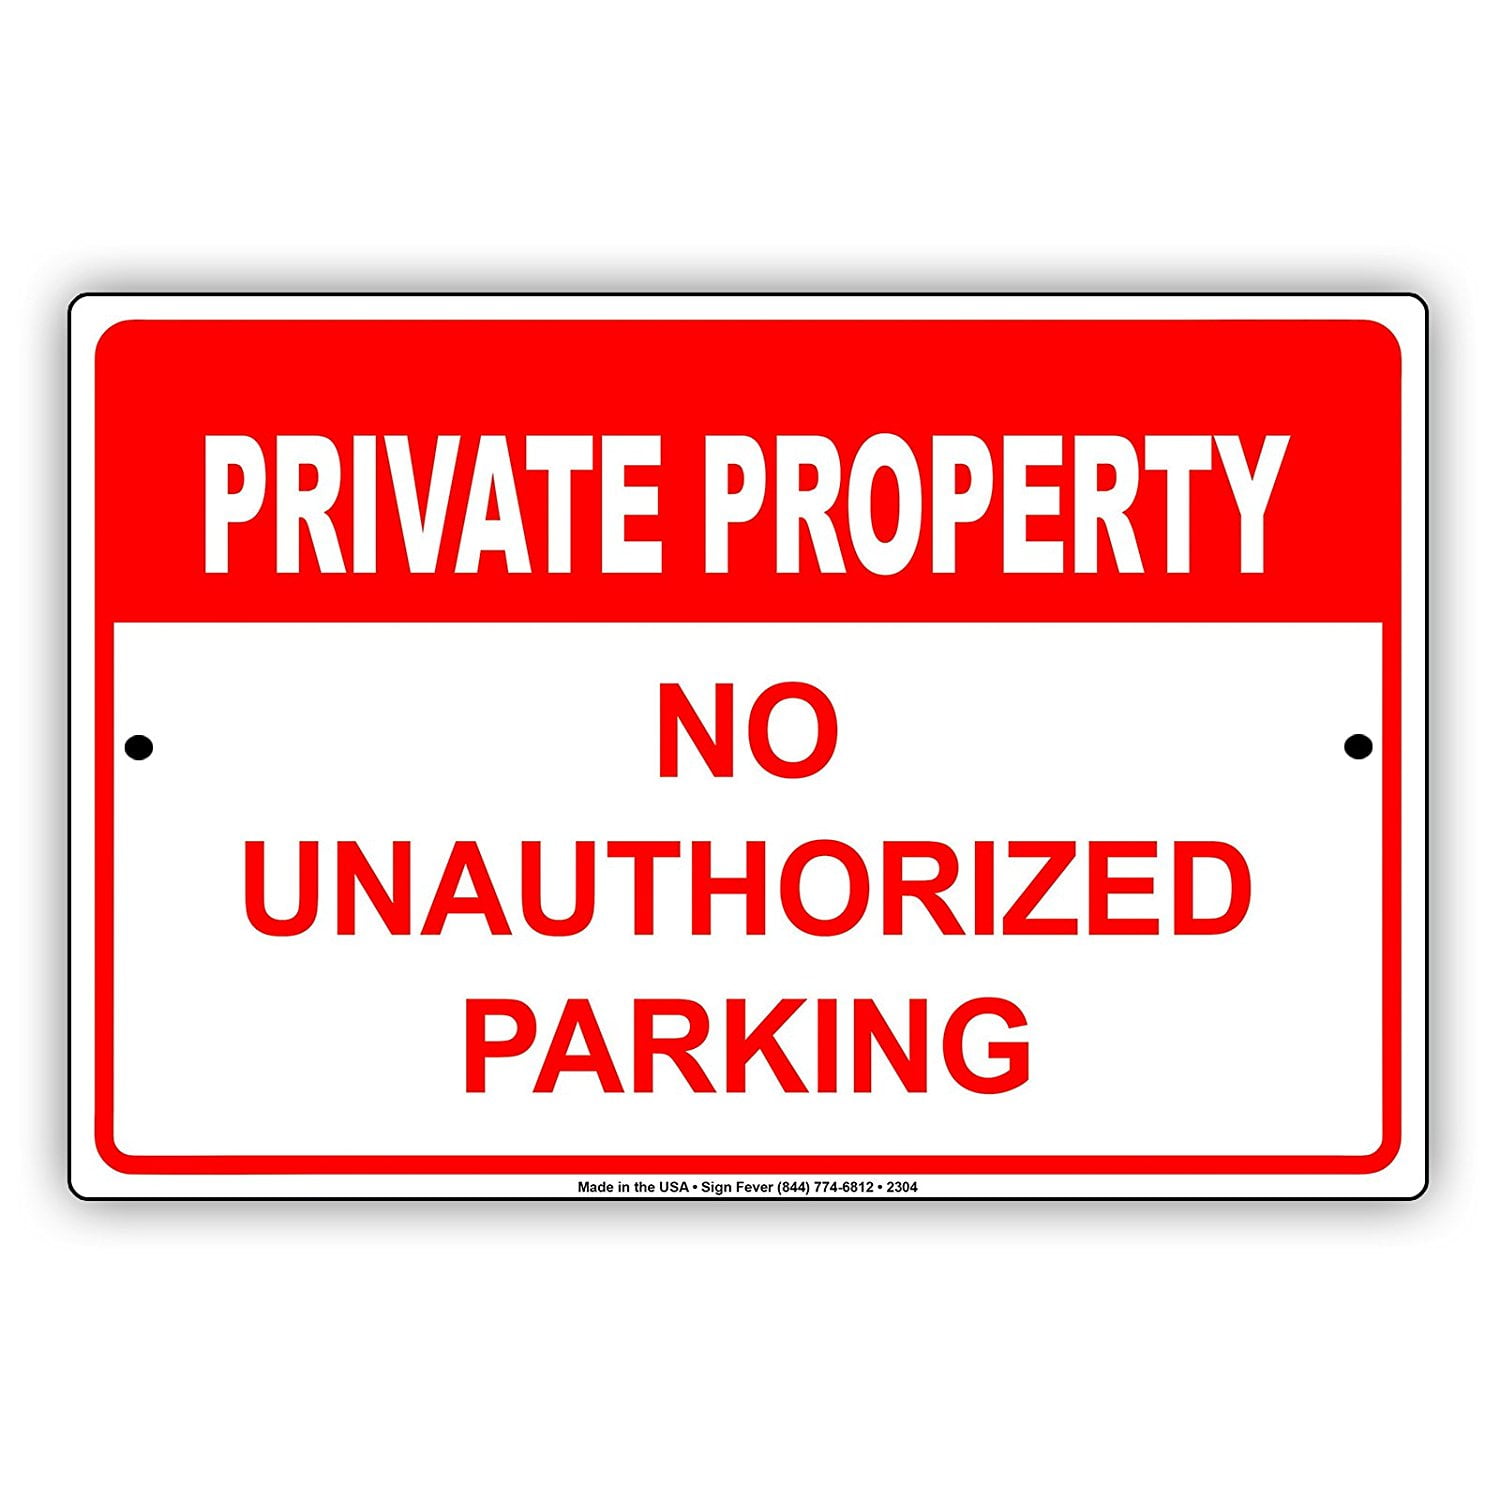 Private Property No Unauthorized Parking Restriction Alert